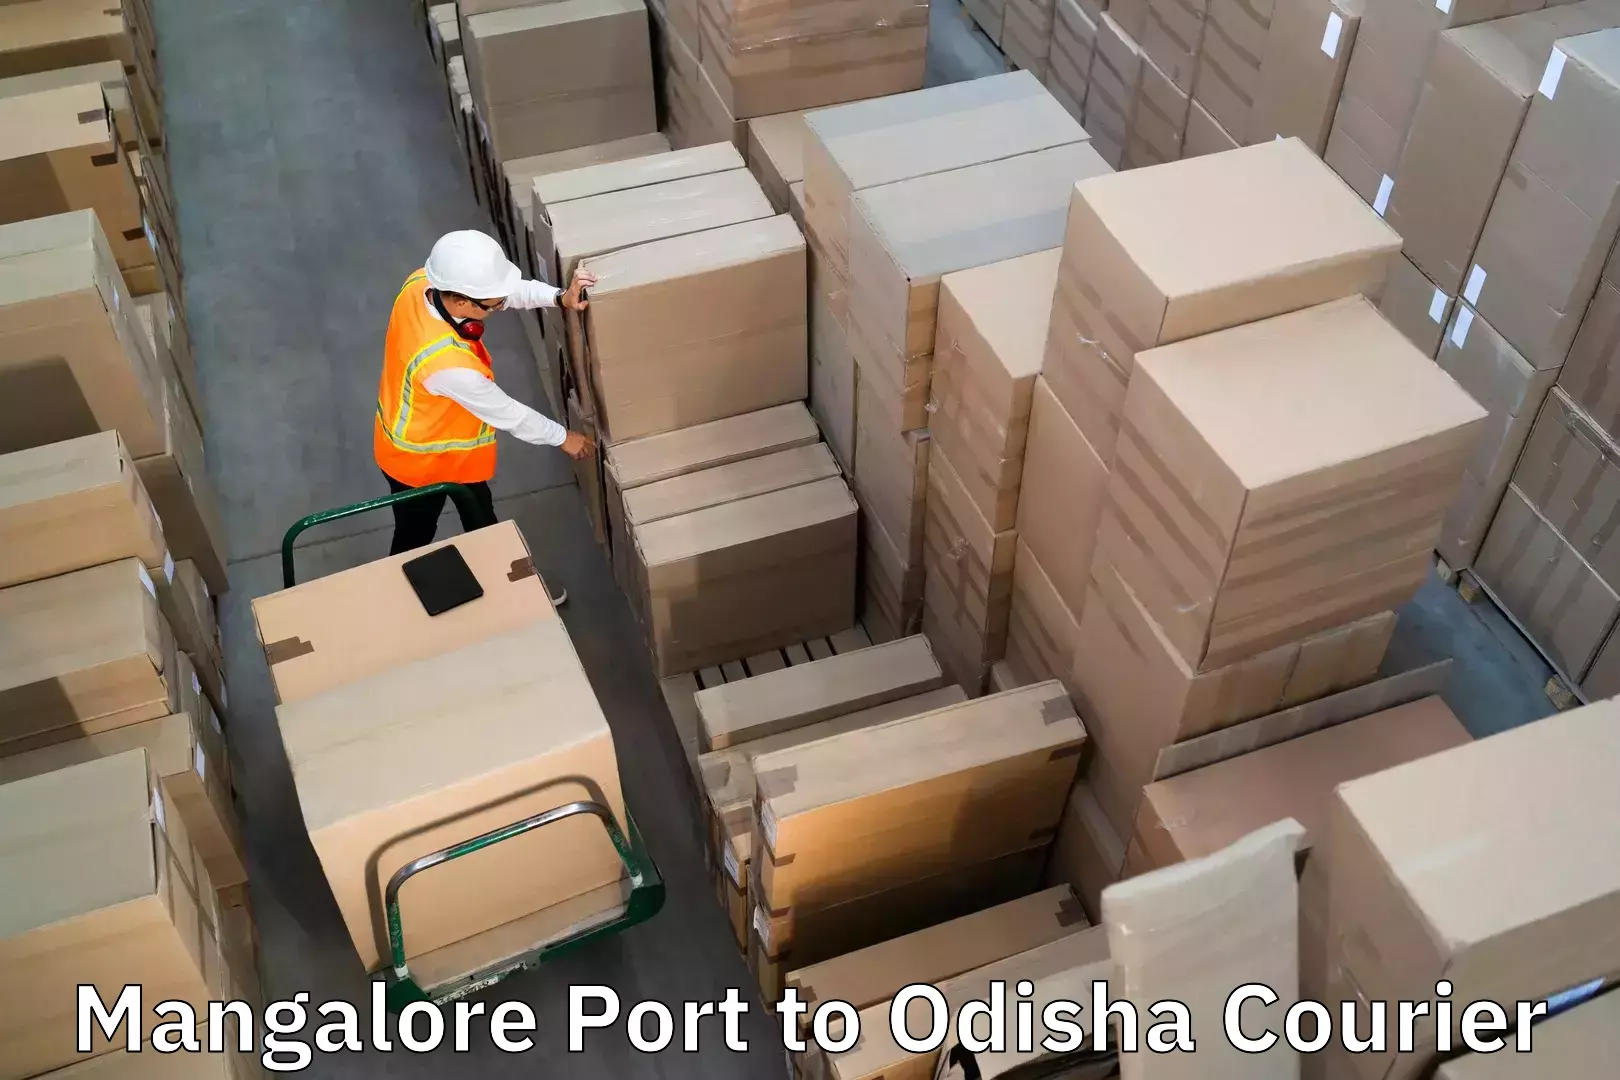 Baggage transport services in Mangalore Port to Boudh